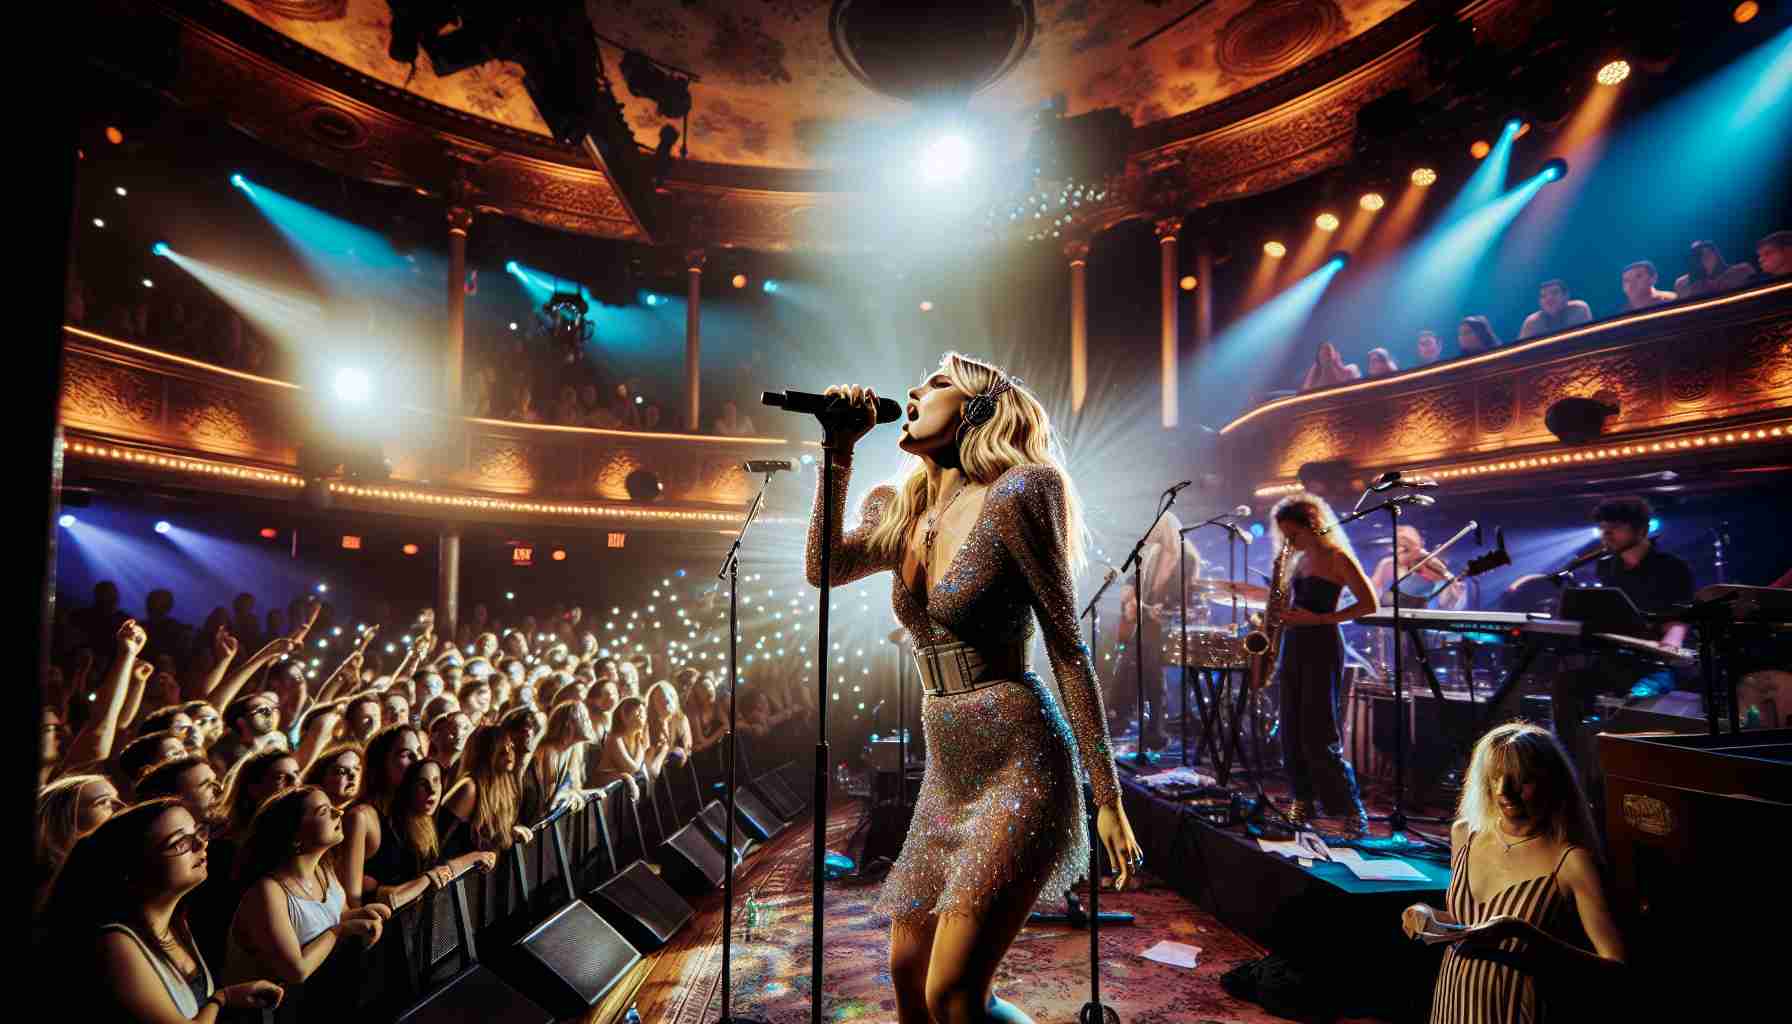 A vibrant, eclectic musical performance at a famed venue by a female singer-songwriter with blond hair and a physique like a pop star. The singer, wearing a sparkly dress, is in the middle of a powerful performance, impressing the audience with her stellar vocals. The venue is filled with enthusiastic fans, creating a sea of bright lights illuminating the venue. Various instruments can be seen around the stage enhancing the musical atmosphere.